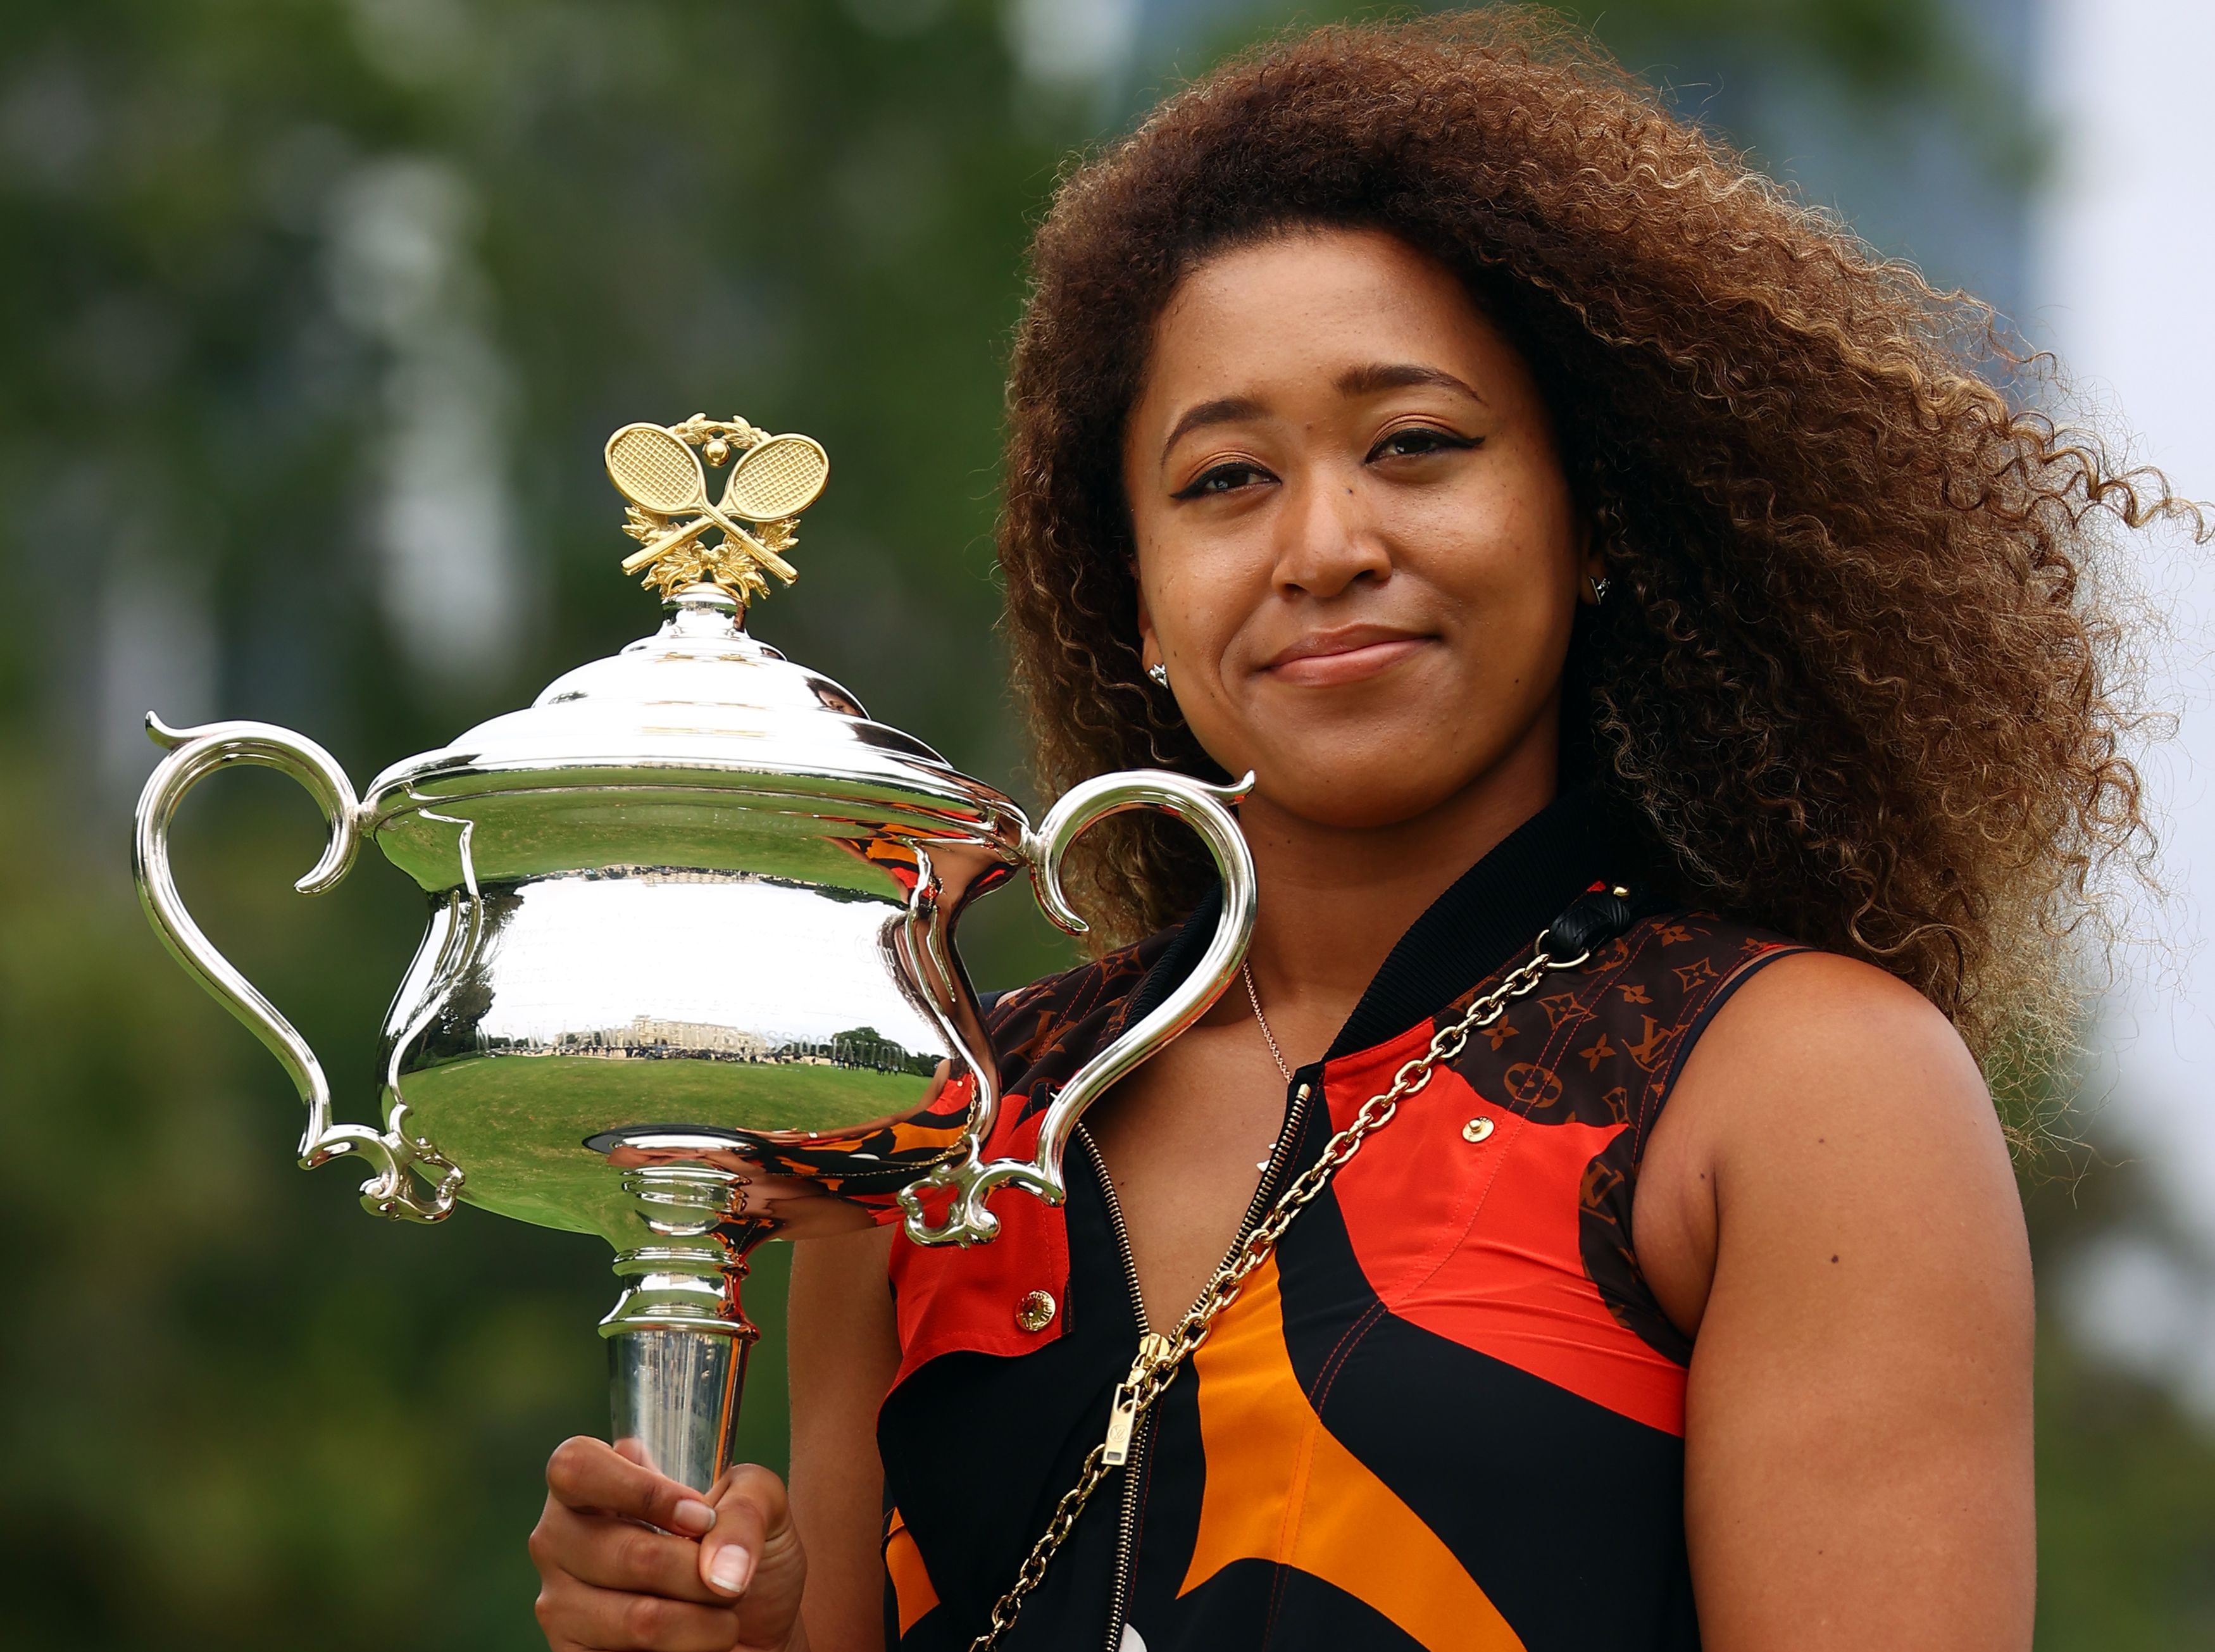 Tennis Star Naomi Osaka Shares Her Simple Hopes for Life After Tennis